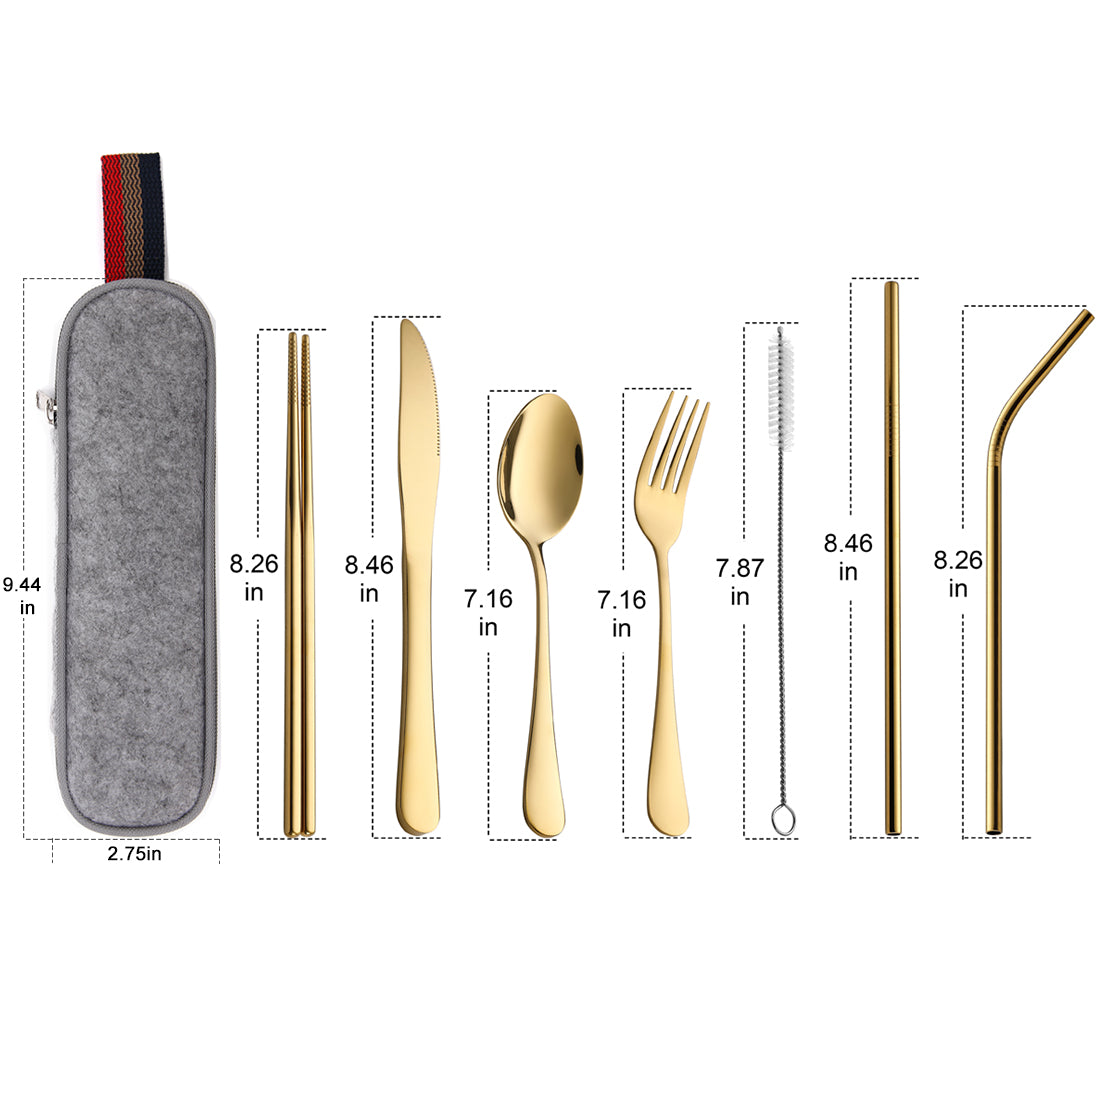 DEVICO Travel Utensils, 18/8 Stainless Steel 4pcs Cutlery Set